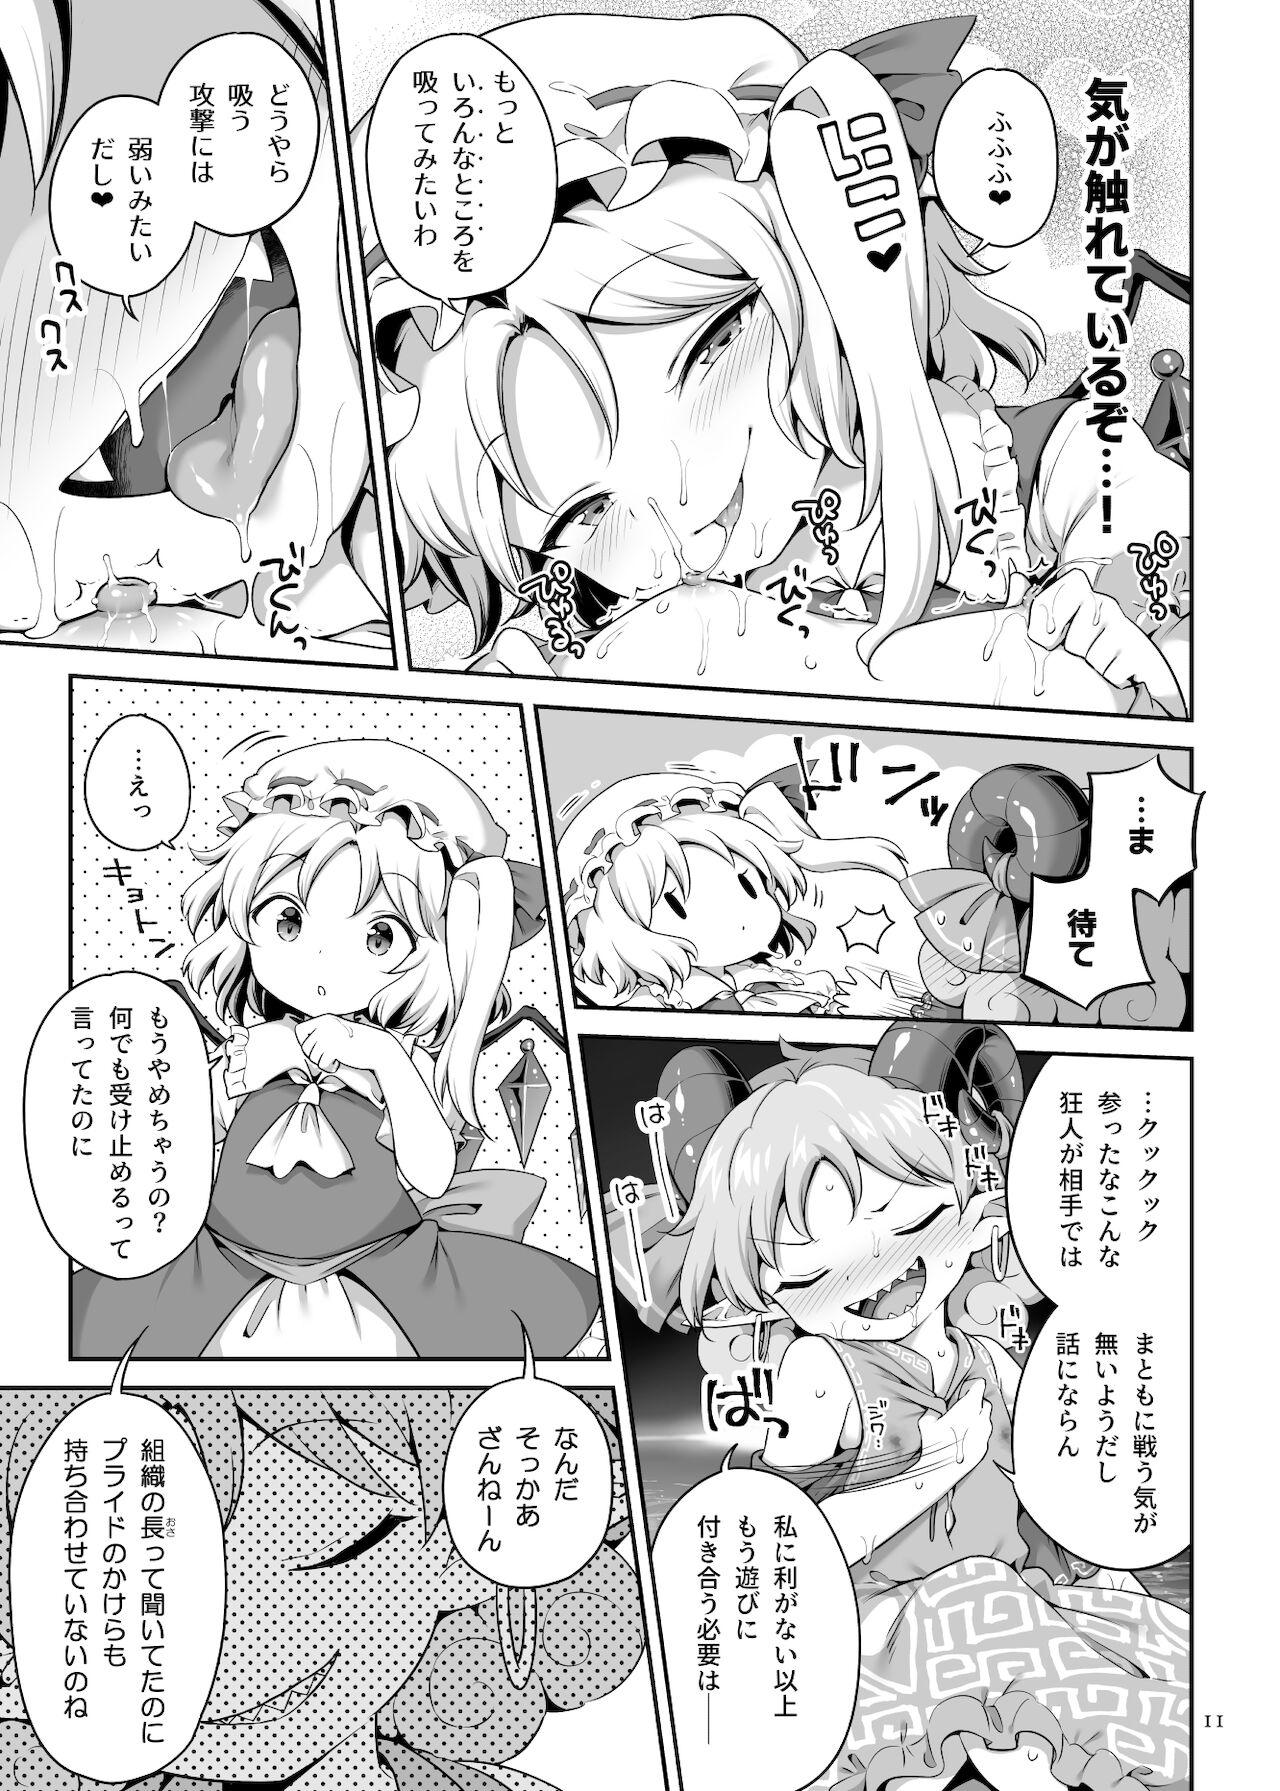 Celebrity Sex 吸われて駄目なら吸ってみろ! - Touhou project Super - Page 11